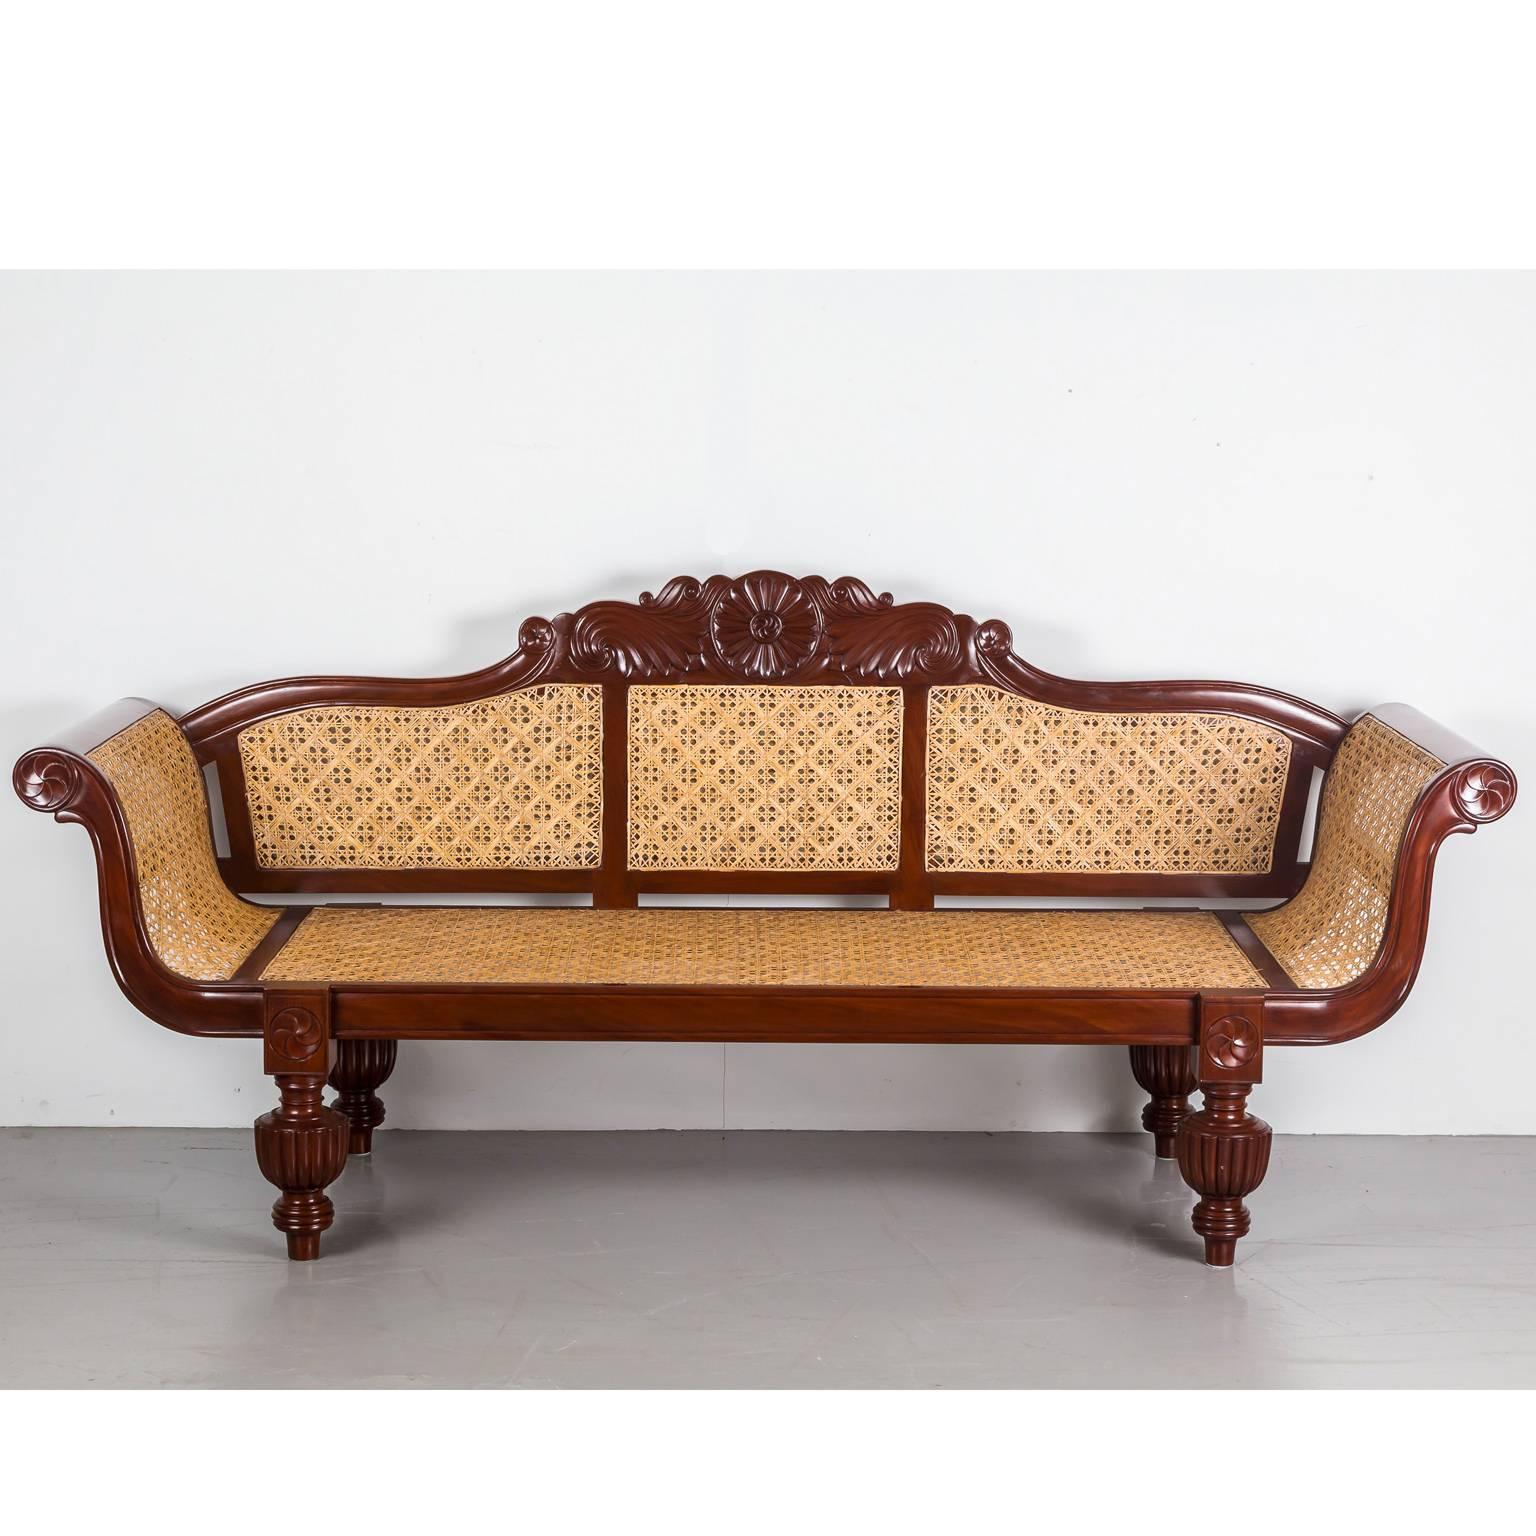 A nice British colonial sofa in mahogany with an arched serpentine crest rail centred by a floral carving. 
The back features three inset caned panels above a caned seat. The scrolled arms also display finely carved floral designs on the ends; a